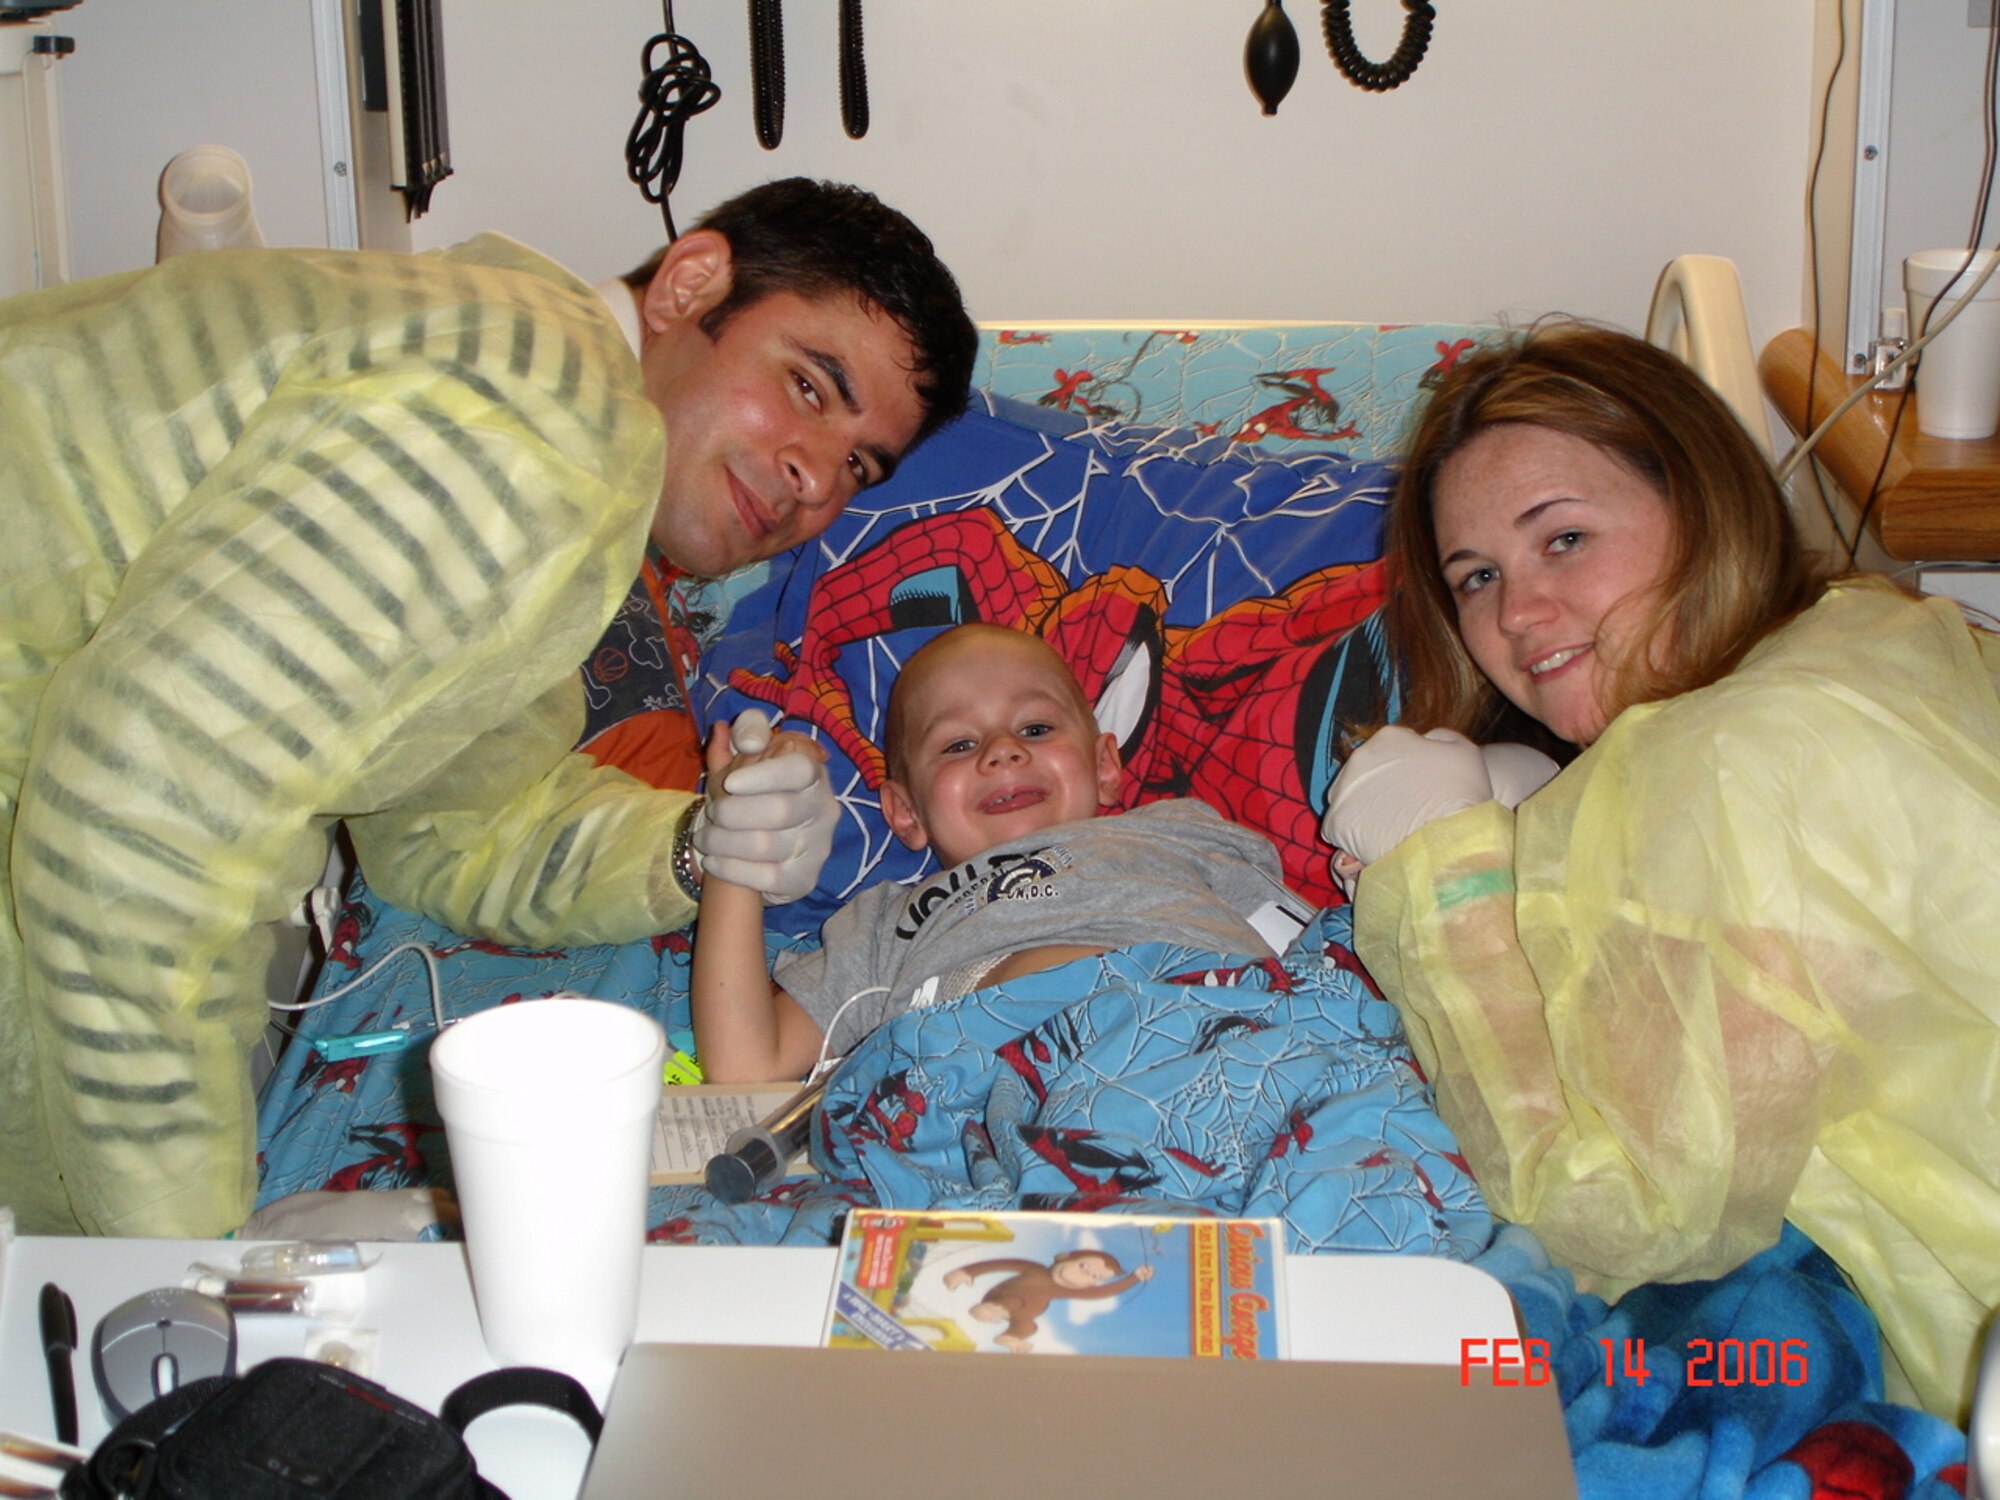 Tech. Sgt. Billy Gazzaway (left) and his wife, Master Sgt. Emily Gazzaway, take a photograph with their son, John Kadin Gazzaway, in February 2006. Kadin died of leukemia May 2, 2006. Billy is assigned to the 21st Communications Squadron at Peterson Air Force Base, Colo. And Emily is the U.S. Air Force Academy's senior enlisted aide. (Courtesy photo)